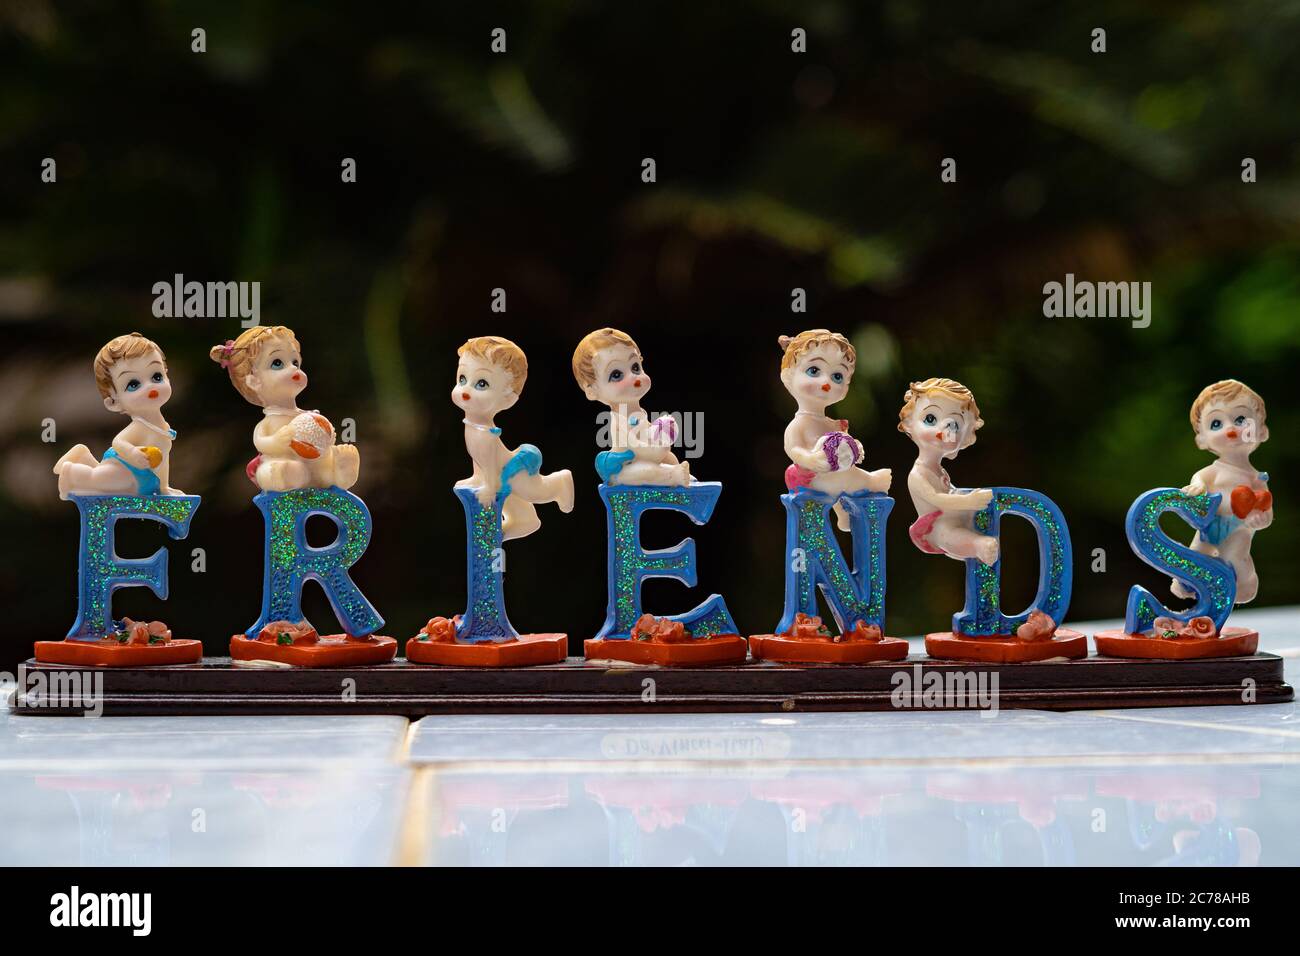 Ceramic dolls on each letter that spells as friends. A very beautiful souvenir for friends. Stock Photo